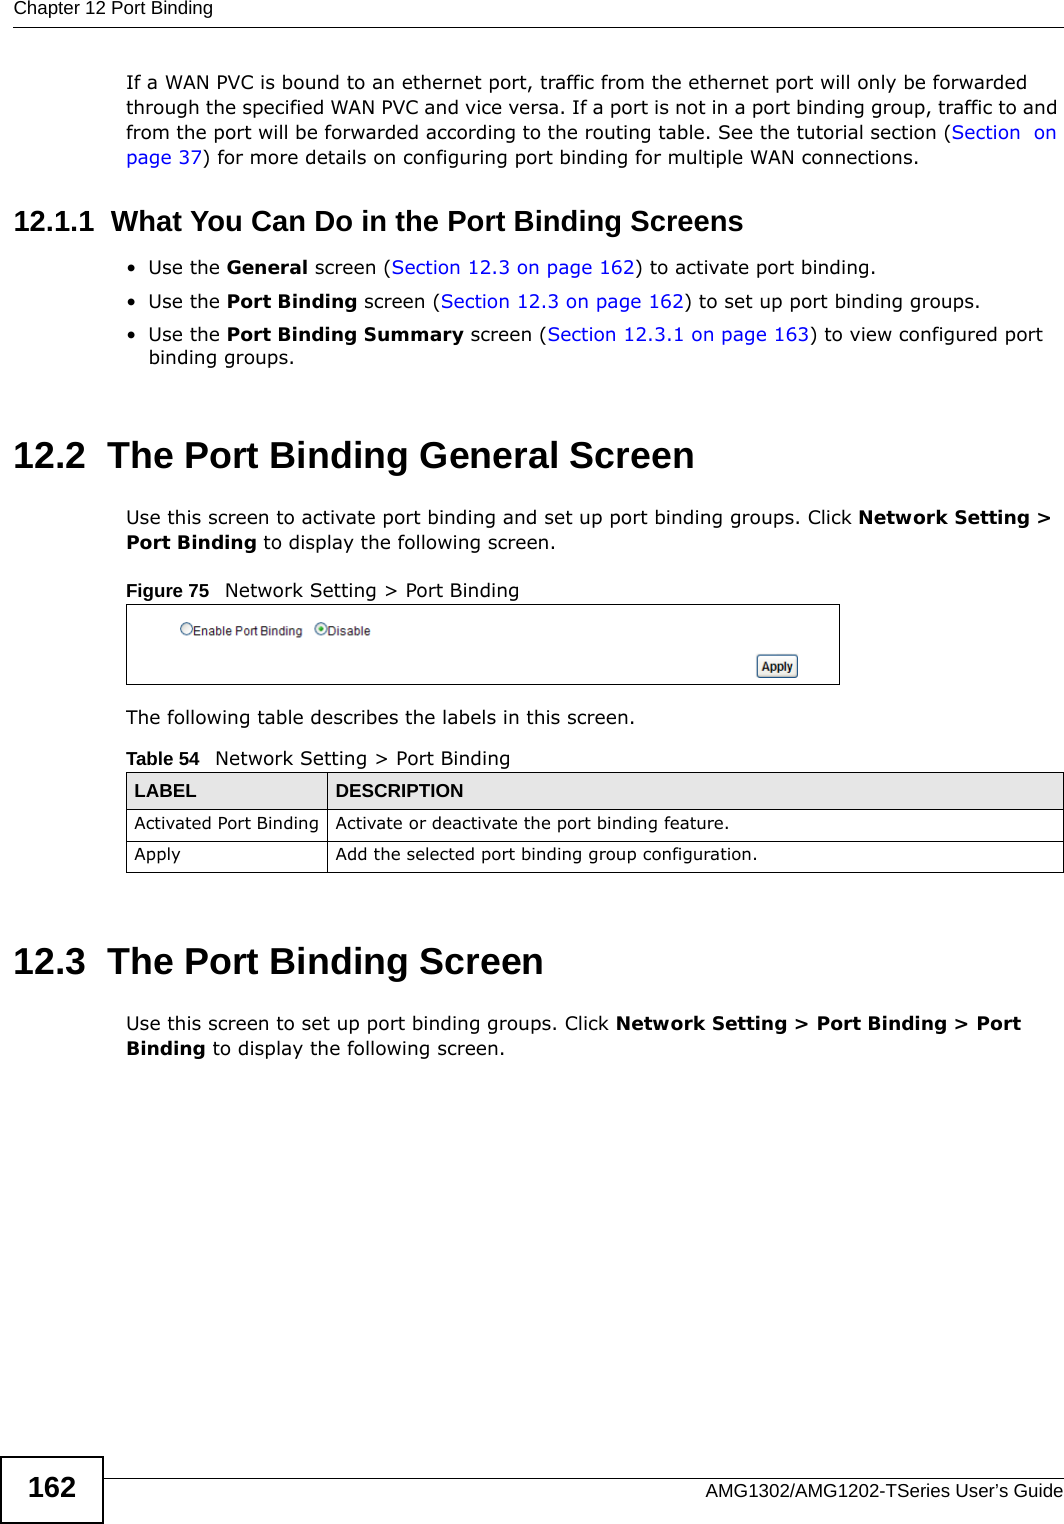 Chapter 12 Port BindingAMG1302/AMG1202-TSeries User’s Guide162If a WAN PVC is bound to an ethernet port, traffic from the ethernet port will only be forwarded through the specified WAN PVC and vice versa. If a port is not in a port binding group, traffic to and from the port will be forwarded according to the routing table. See the tutorial section (Section  on page 37) for more details on configuring port binding for multiple WAN connections.12.1.1  What You Can Do in the Port Binding Screens•Use the General screen (Section 12.3 on page 162) to activate port binding.•Use the Port Binding screen (Section 12.3 on page 162) to set up port binding groups.•Use the Port Binding Summary screen (Section 12.3.1 on page 163) to view configured port binding groups.12.2  The Port Binding General ScreenUse this screen to activate port binding and set up port binding groups. Click Network Setting &gt; Port Binding to display the following screen.Figure 75   Network Setting &gt; Port BindingThe following table describes the labels in this screen. 12.3  The Port Binding ScreenUse this screen to set up port binding groups. Click Network Setting &gt; Port Binding &gt; Port Binding to display the following screen.Table 54   Network Setting &gt; Port BindingLABEL DESCRIPTIONActivated Port Binding Activate or deactivate the port binding feature.Apply Add the selected port binding group configuration.